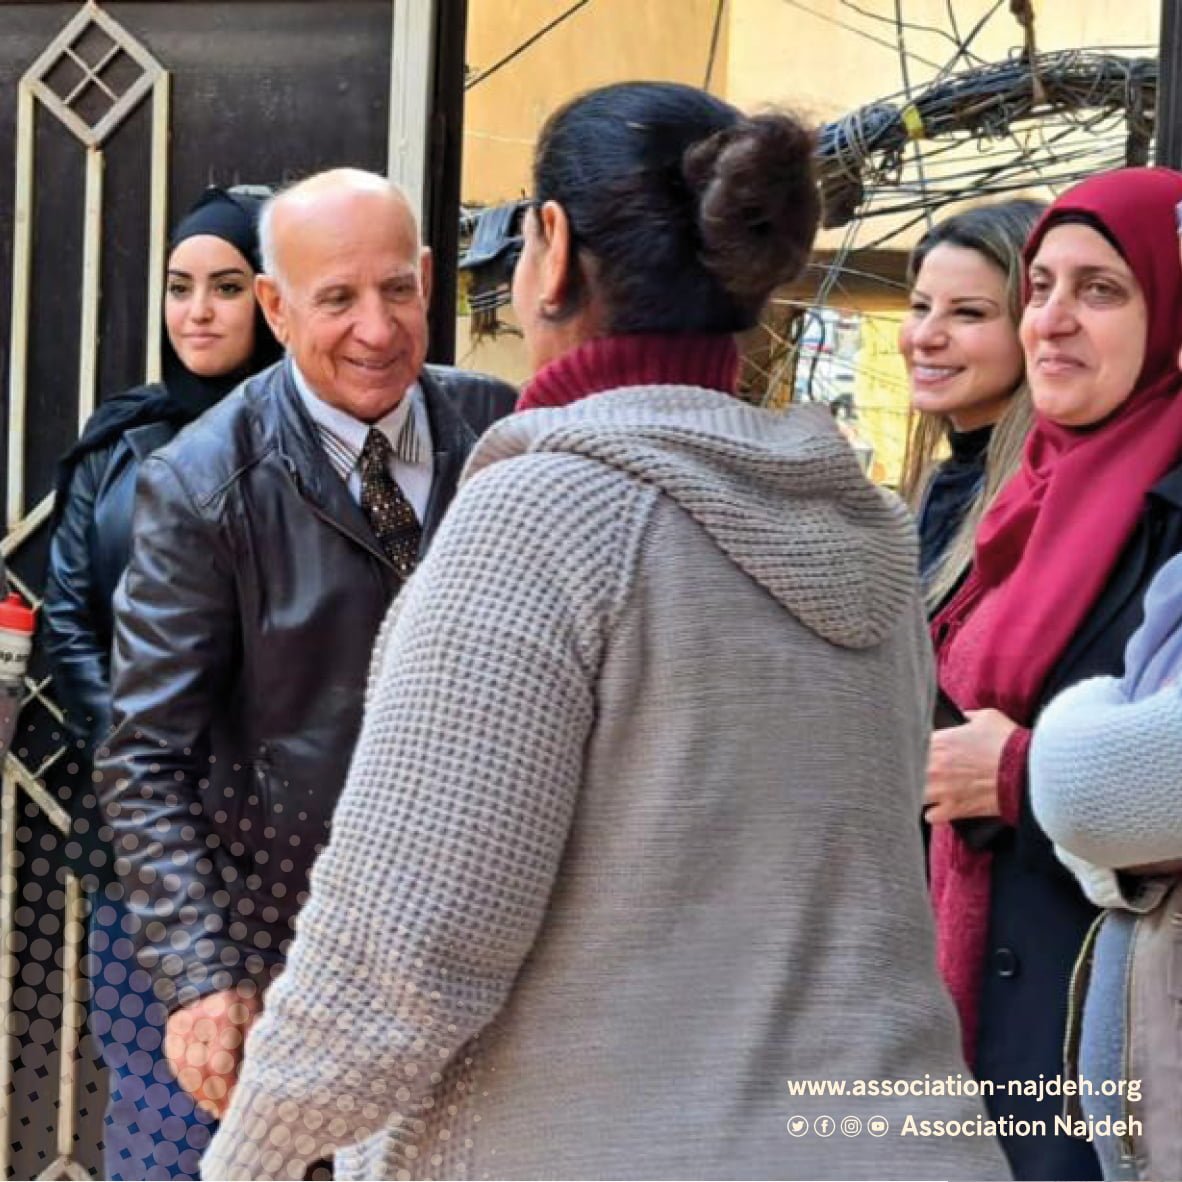 Delegatory visit from the medical aid foundation for Palestinians alongside Association Najdeh in Al-Badawi camp.